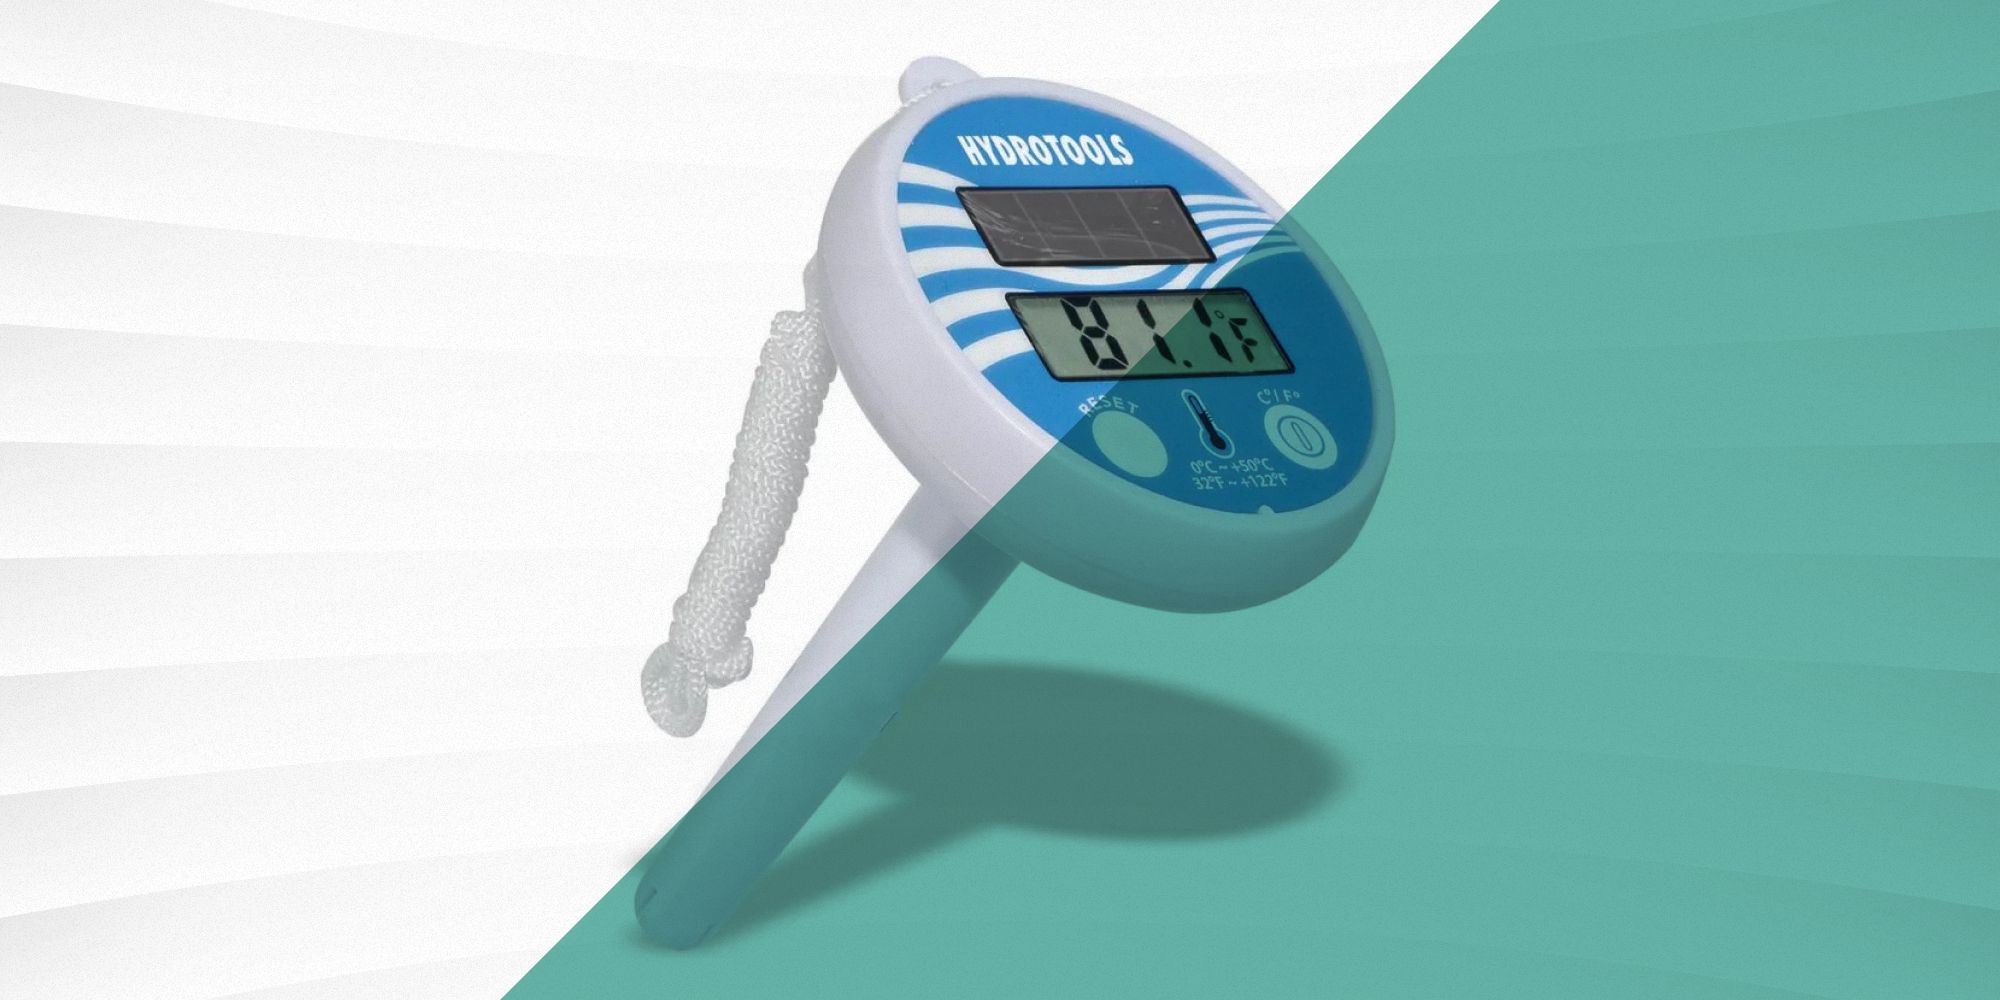 Solar Cell Outdoor Thermometer - Large outdoor thermometer